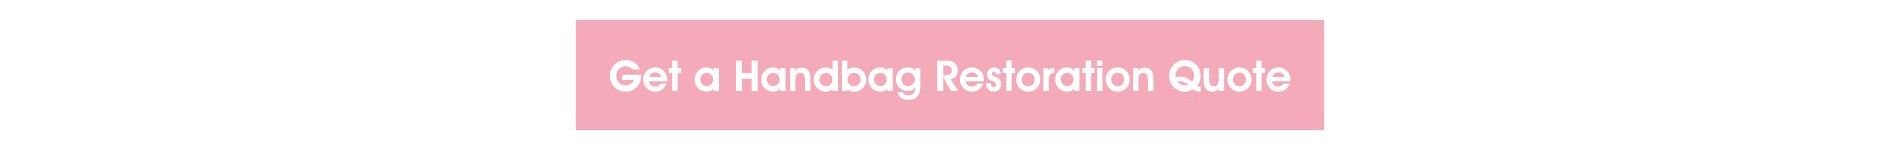 get your free handbag clinic restoration quote here